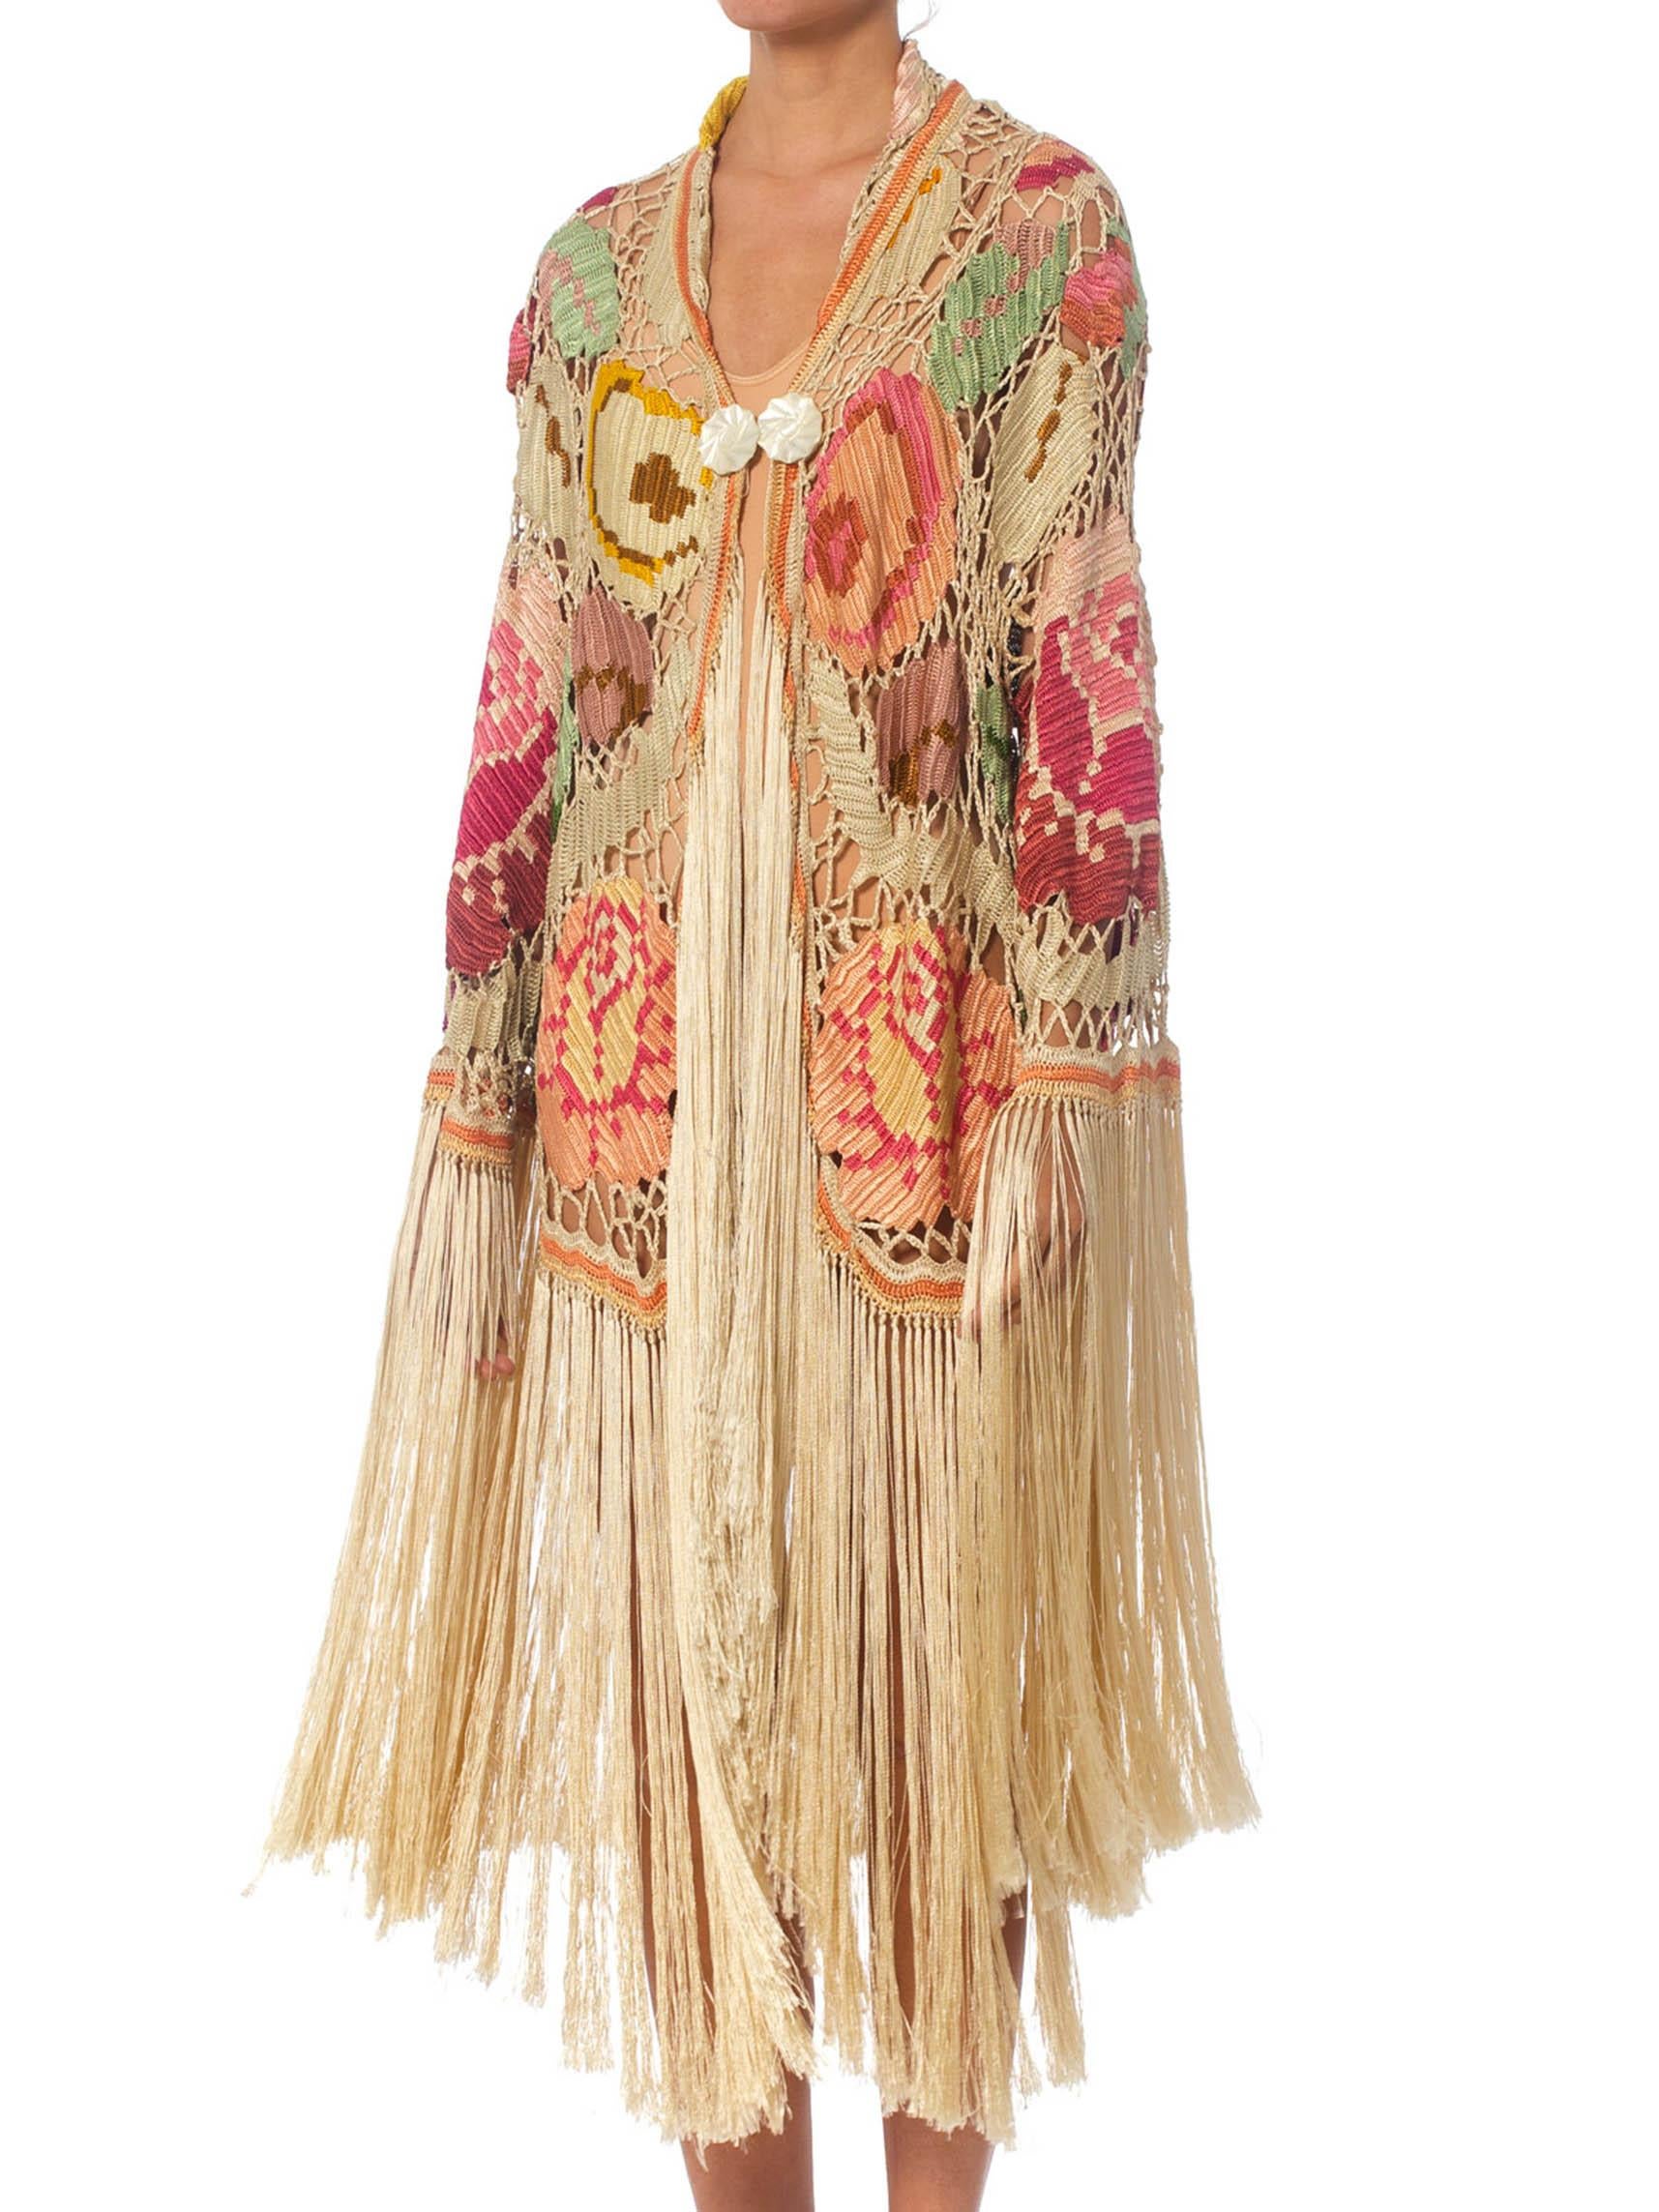 MORPHEW COLLECTION Cream & Pastels Silk Fringe Cocoon Made From An Antique 1920S Crochet Shawl